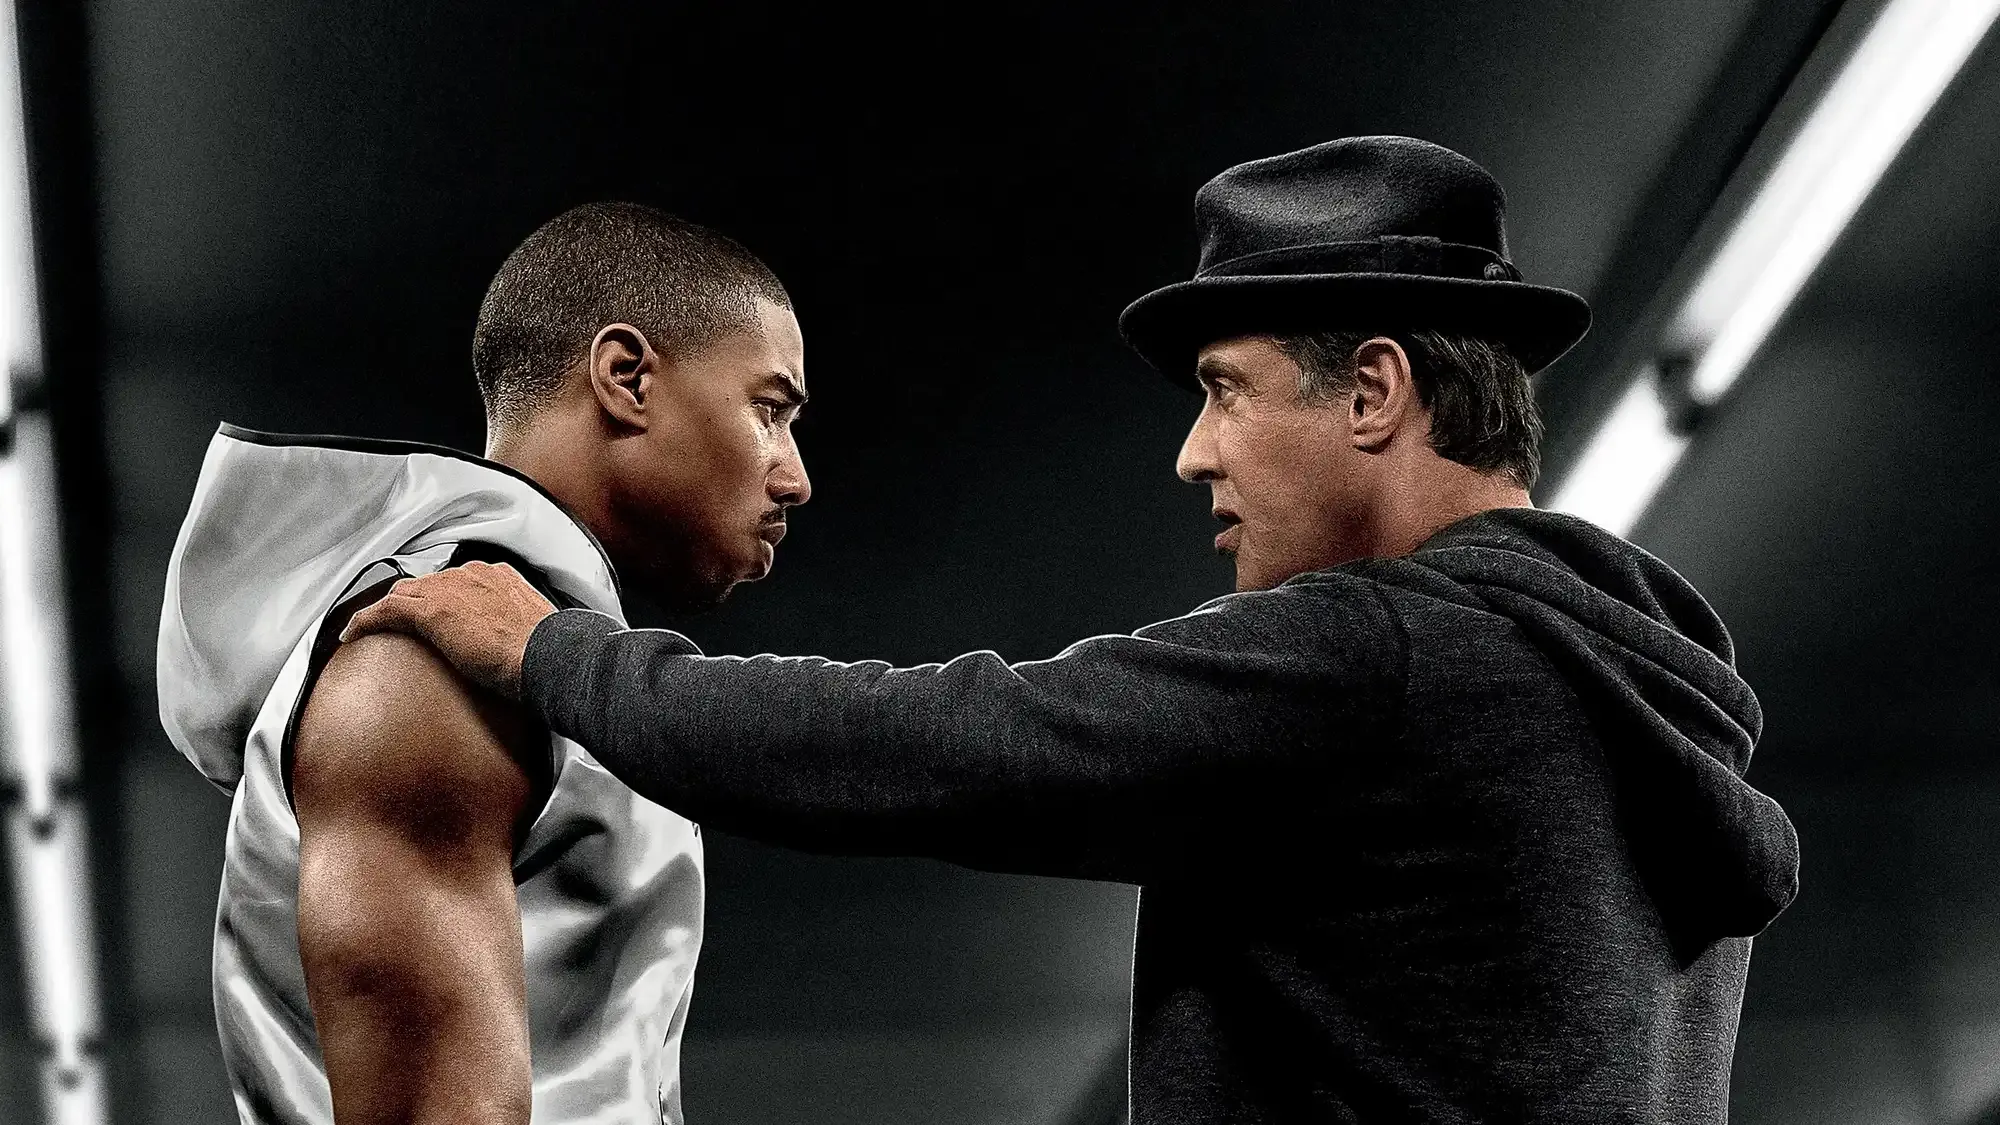 Creed movie review